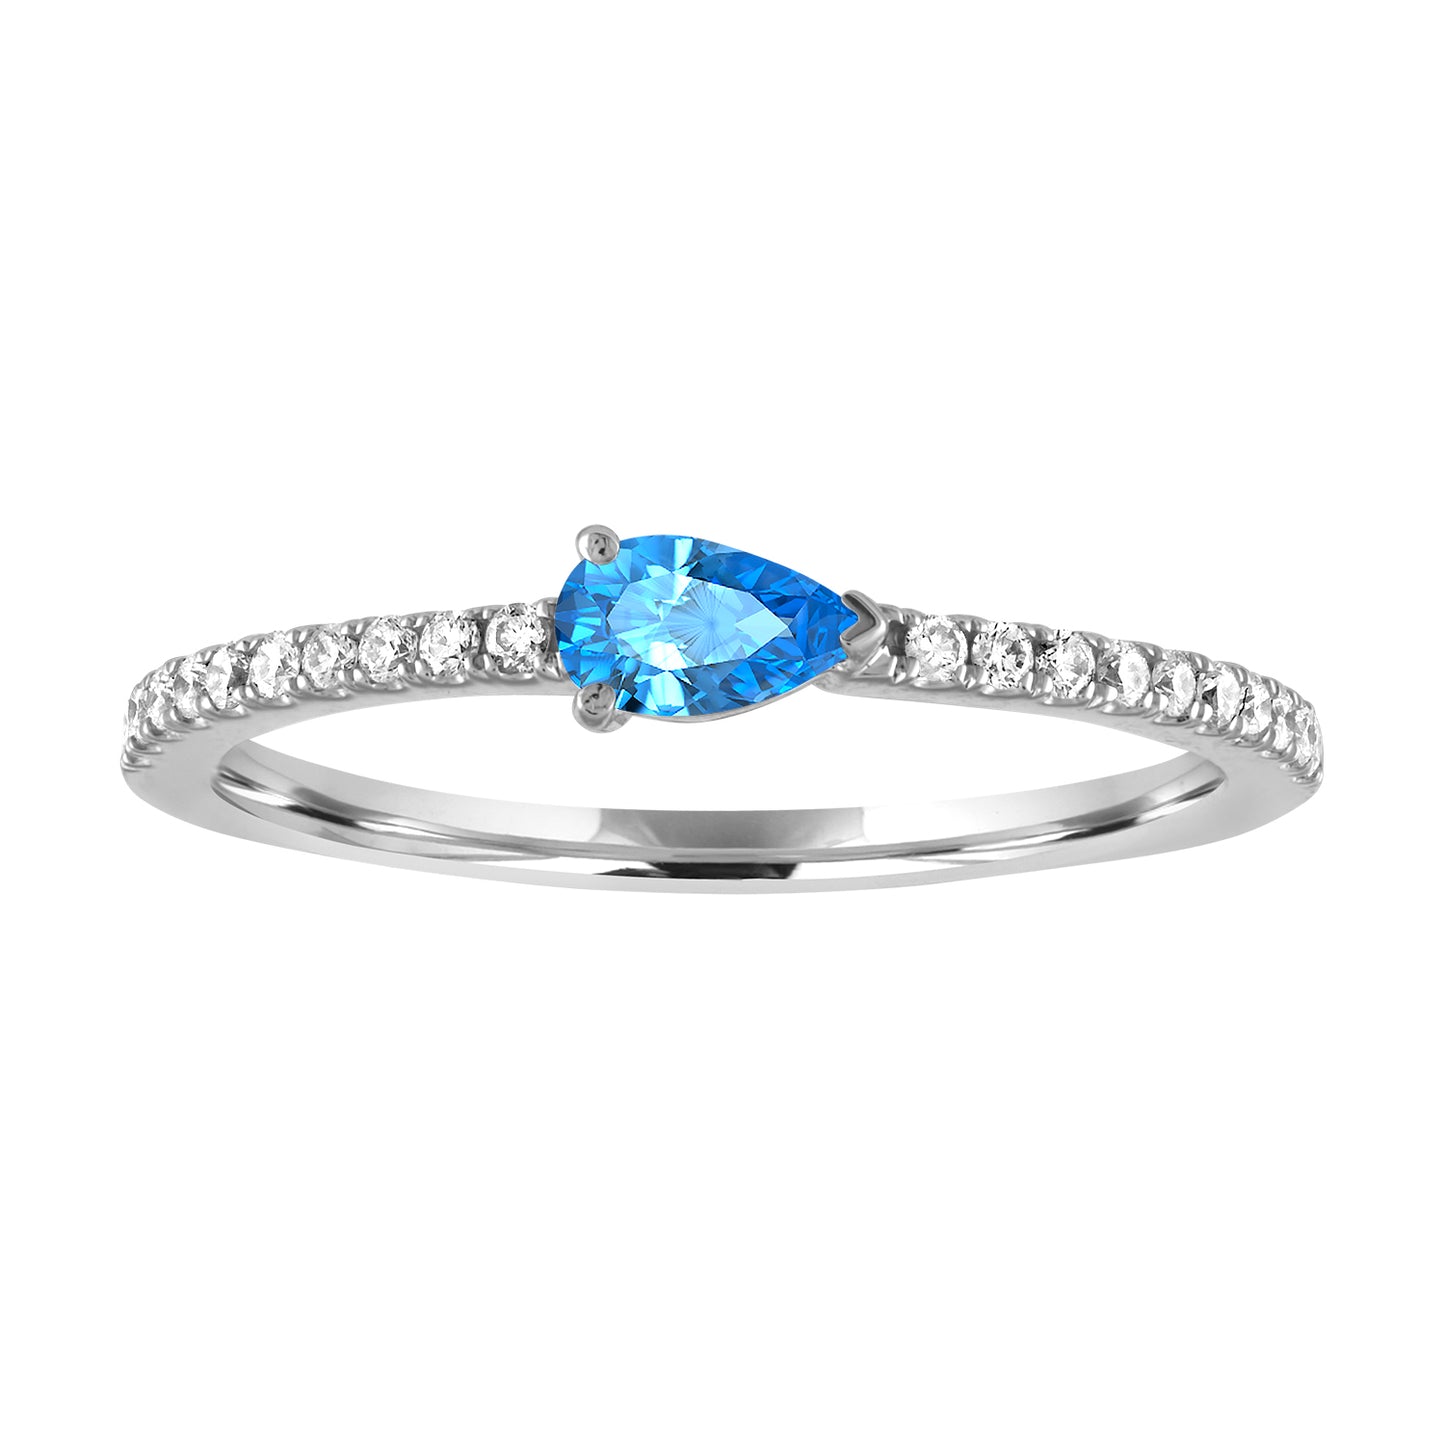 White gold skinny band with a pear shaped blue topaz in the center and round diamonds on the shank.